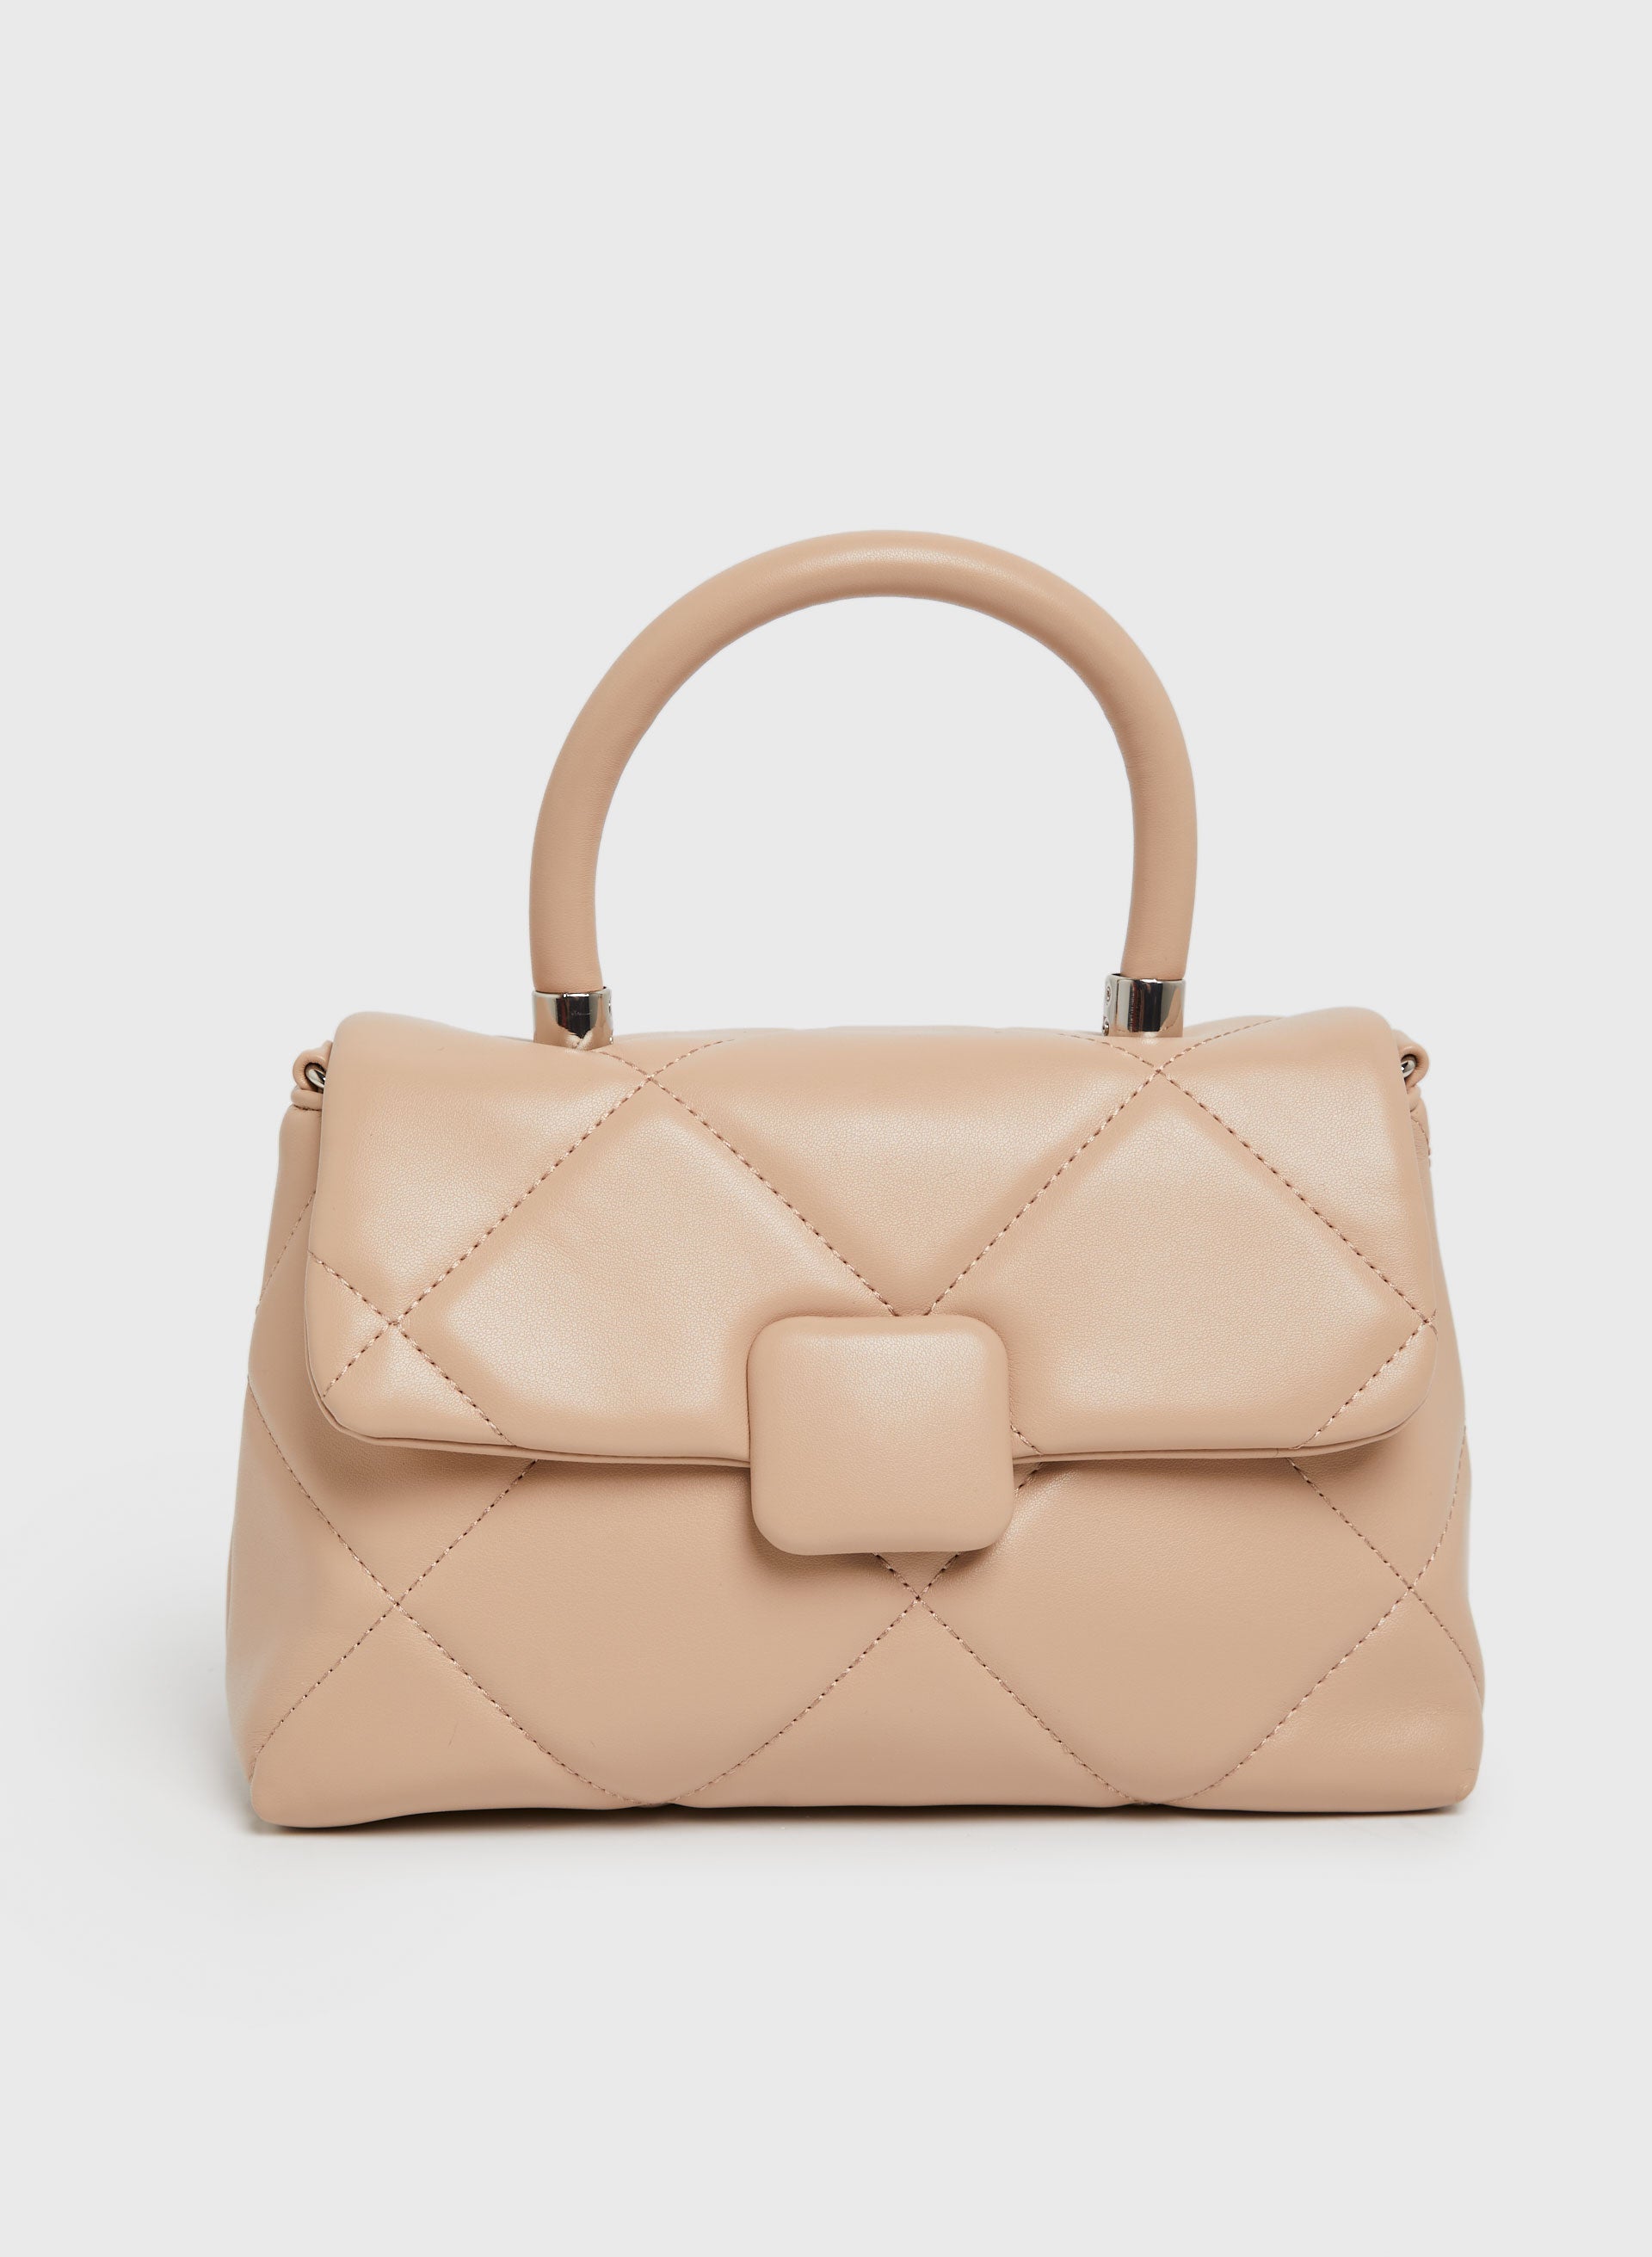 Quilted Vegan Leather Bag